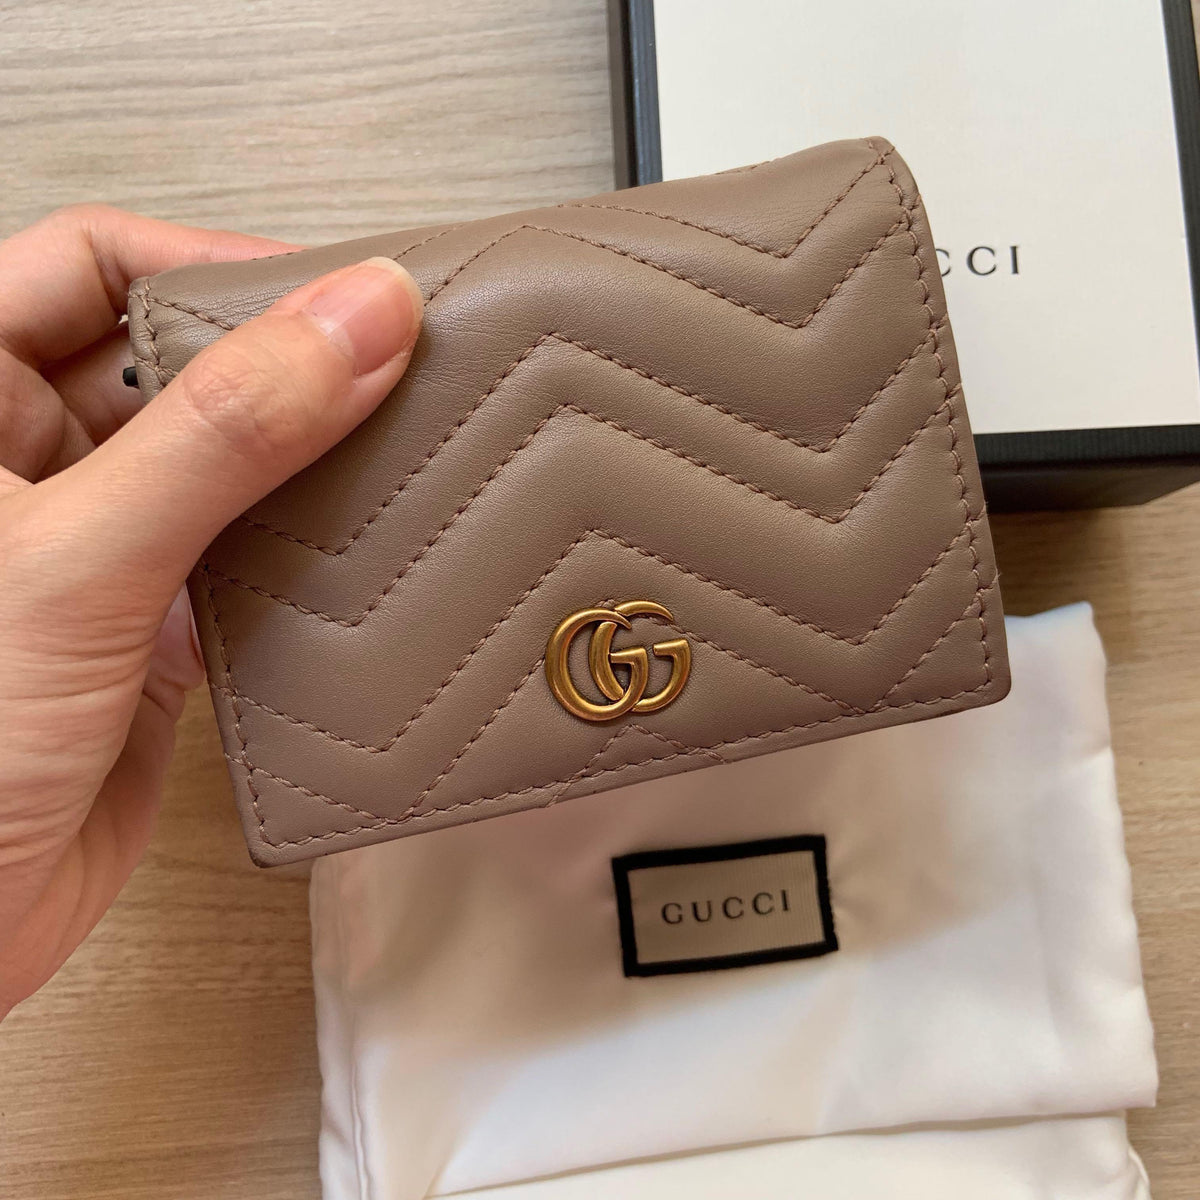 How to Spot a Fake Gucci Wallet